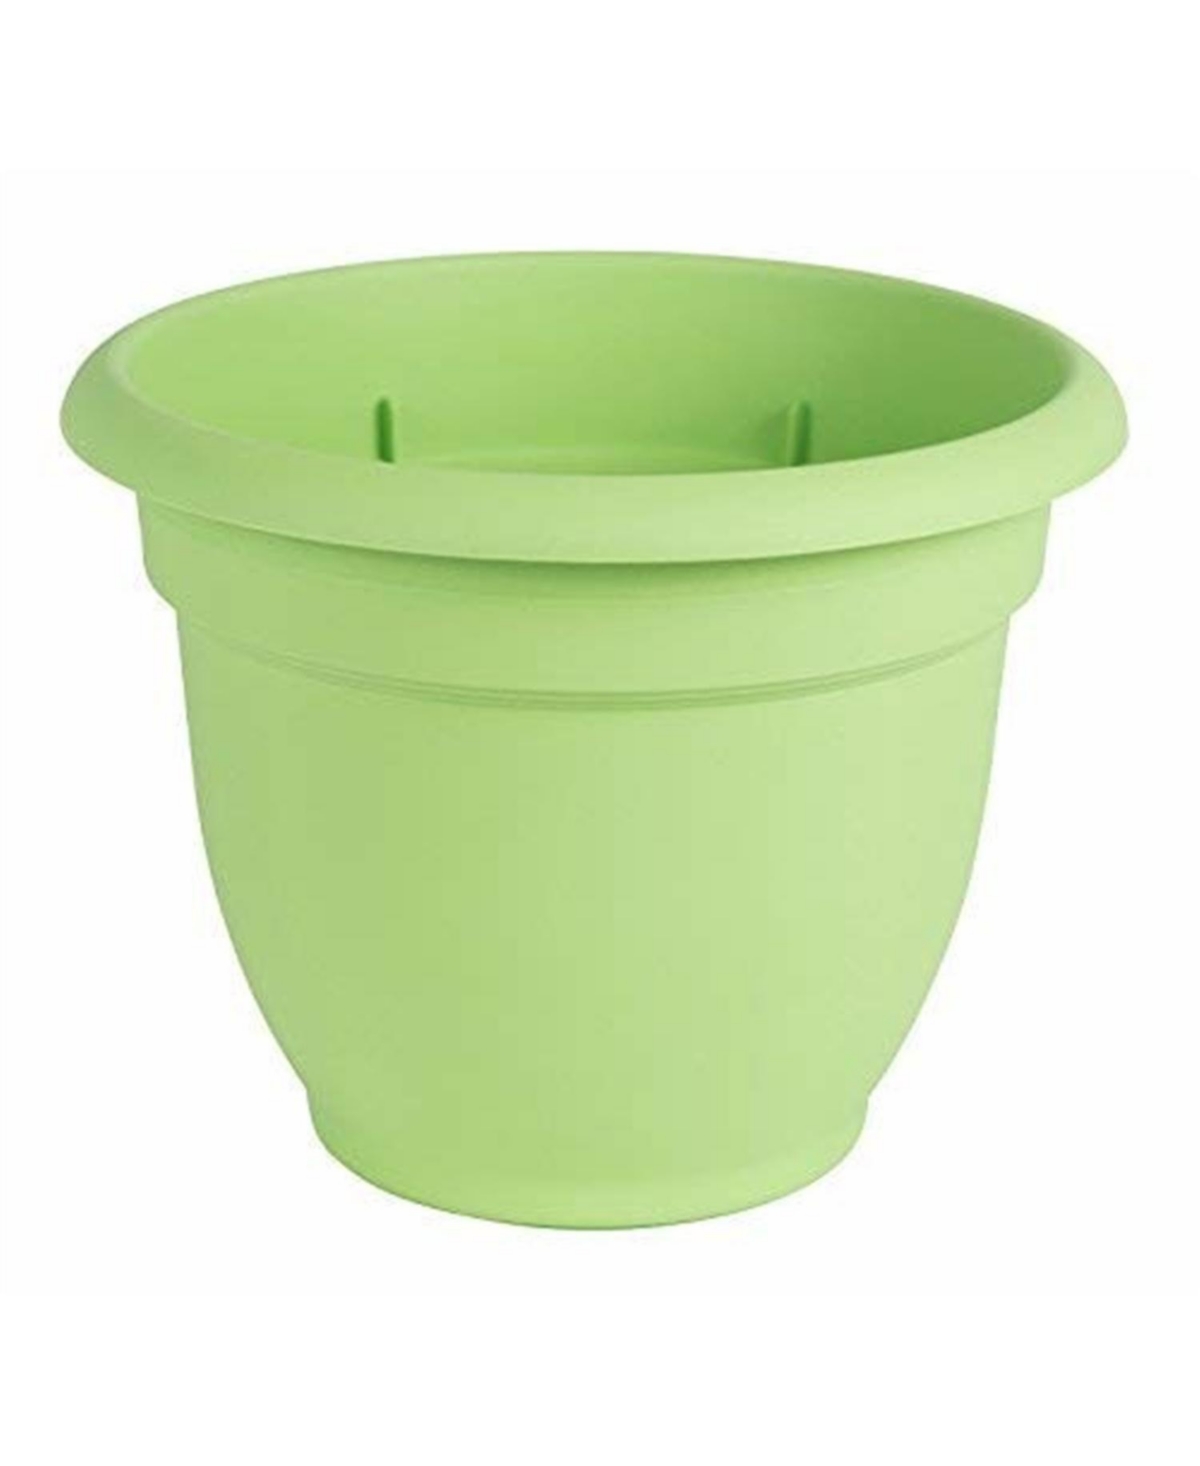 Ariana Planter with Self-Watering Disk, Honey Dew - 10 inches - Green